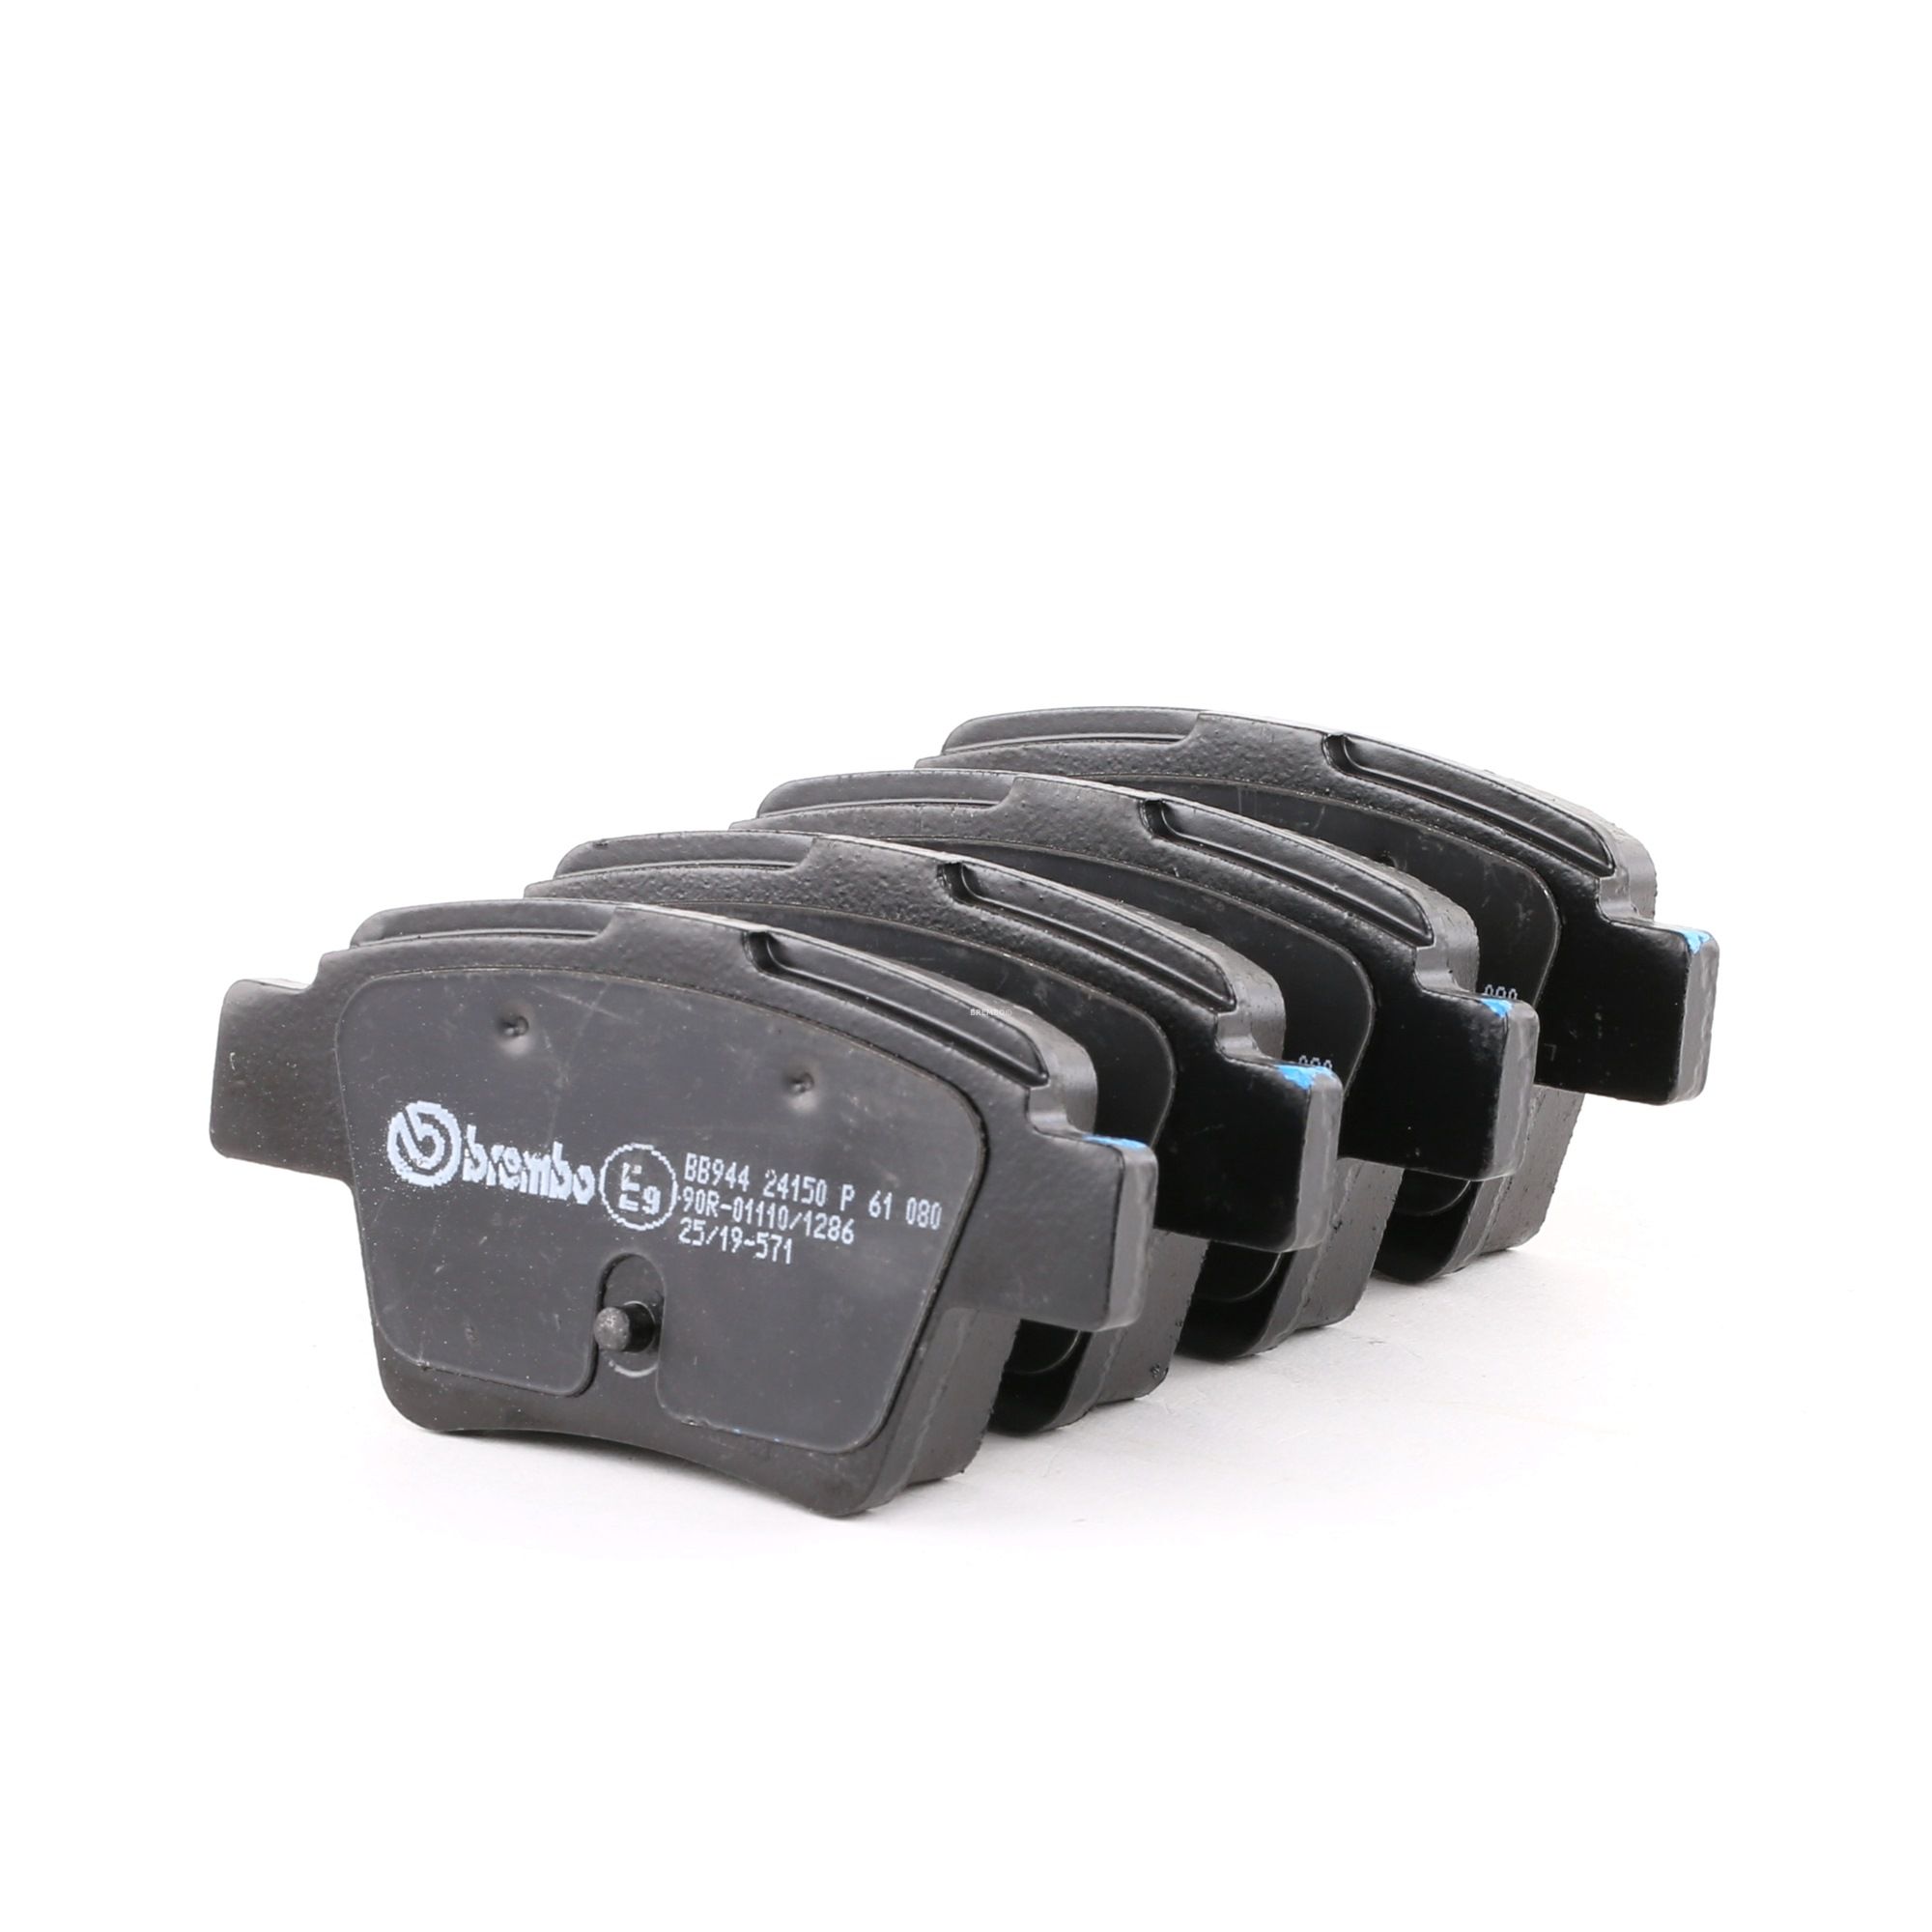 BREMBO P 61 080 Brake pad set excl. wear warning contact, with brake caliper screws, with accessories